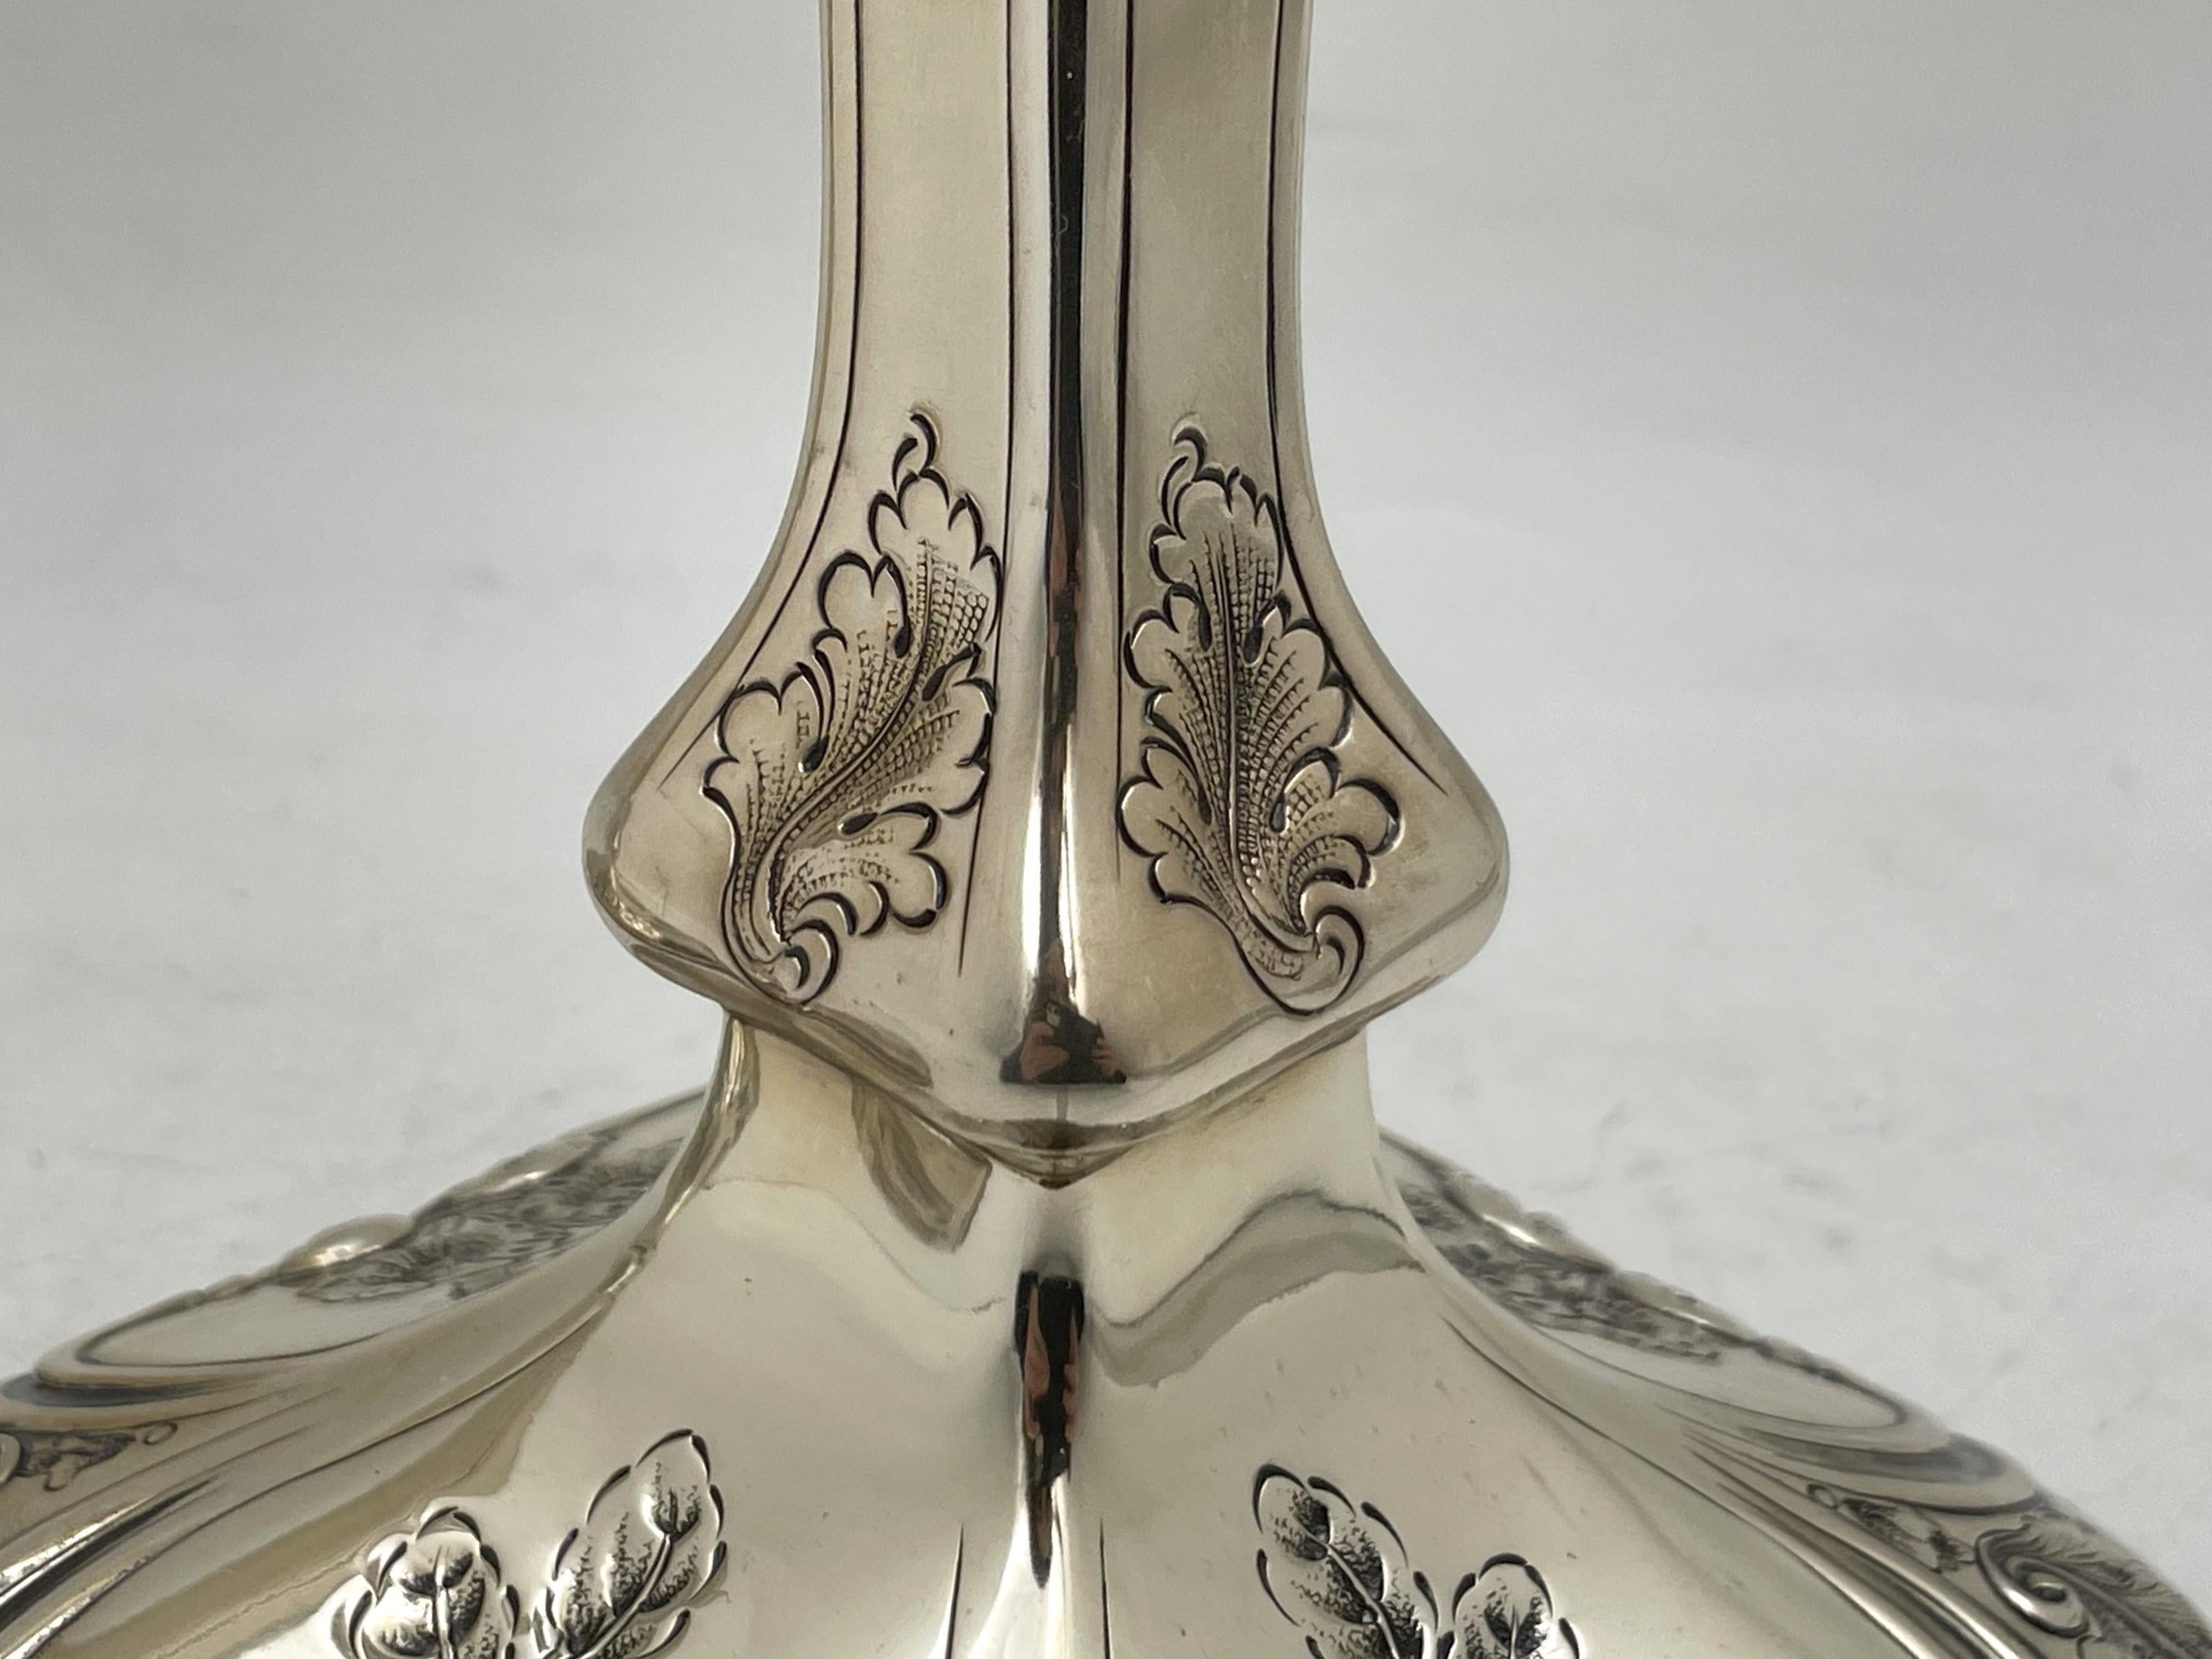 Shreve & Co. Set of 4 Sterling Silver Candlesticks in Art Nouveau Style 3